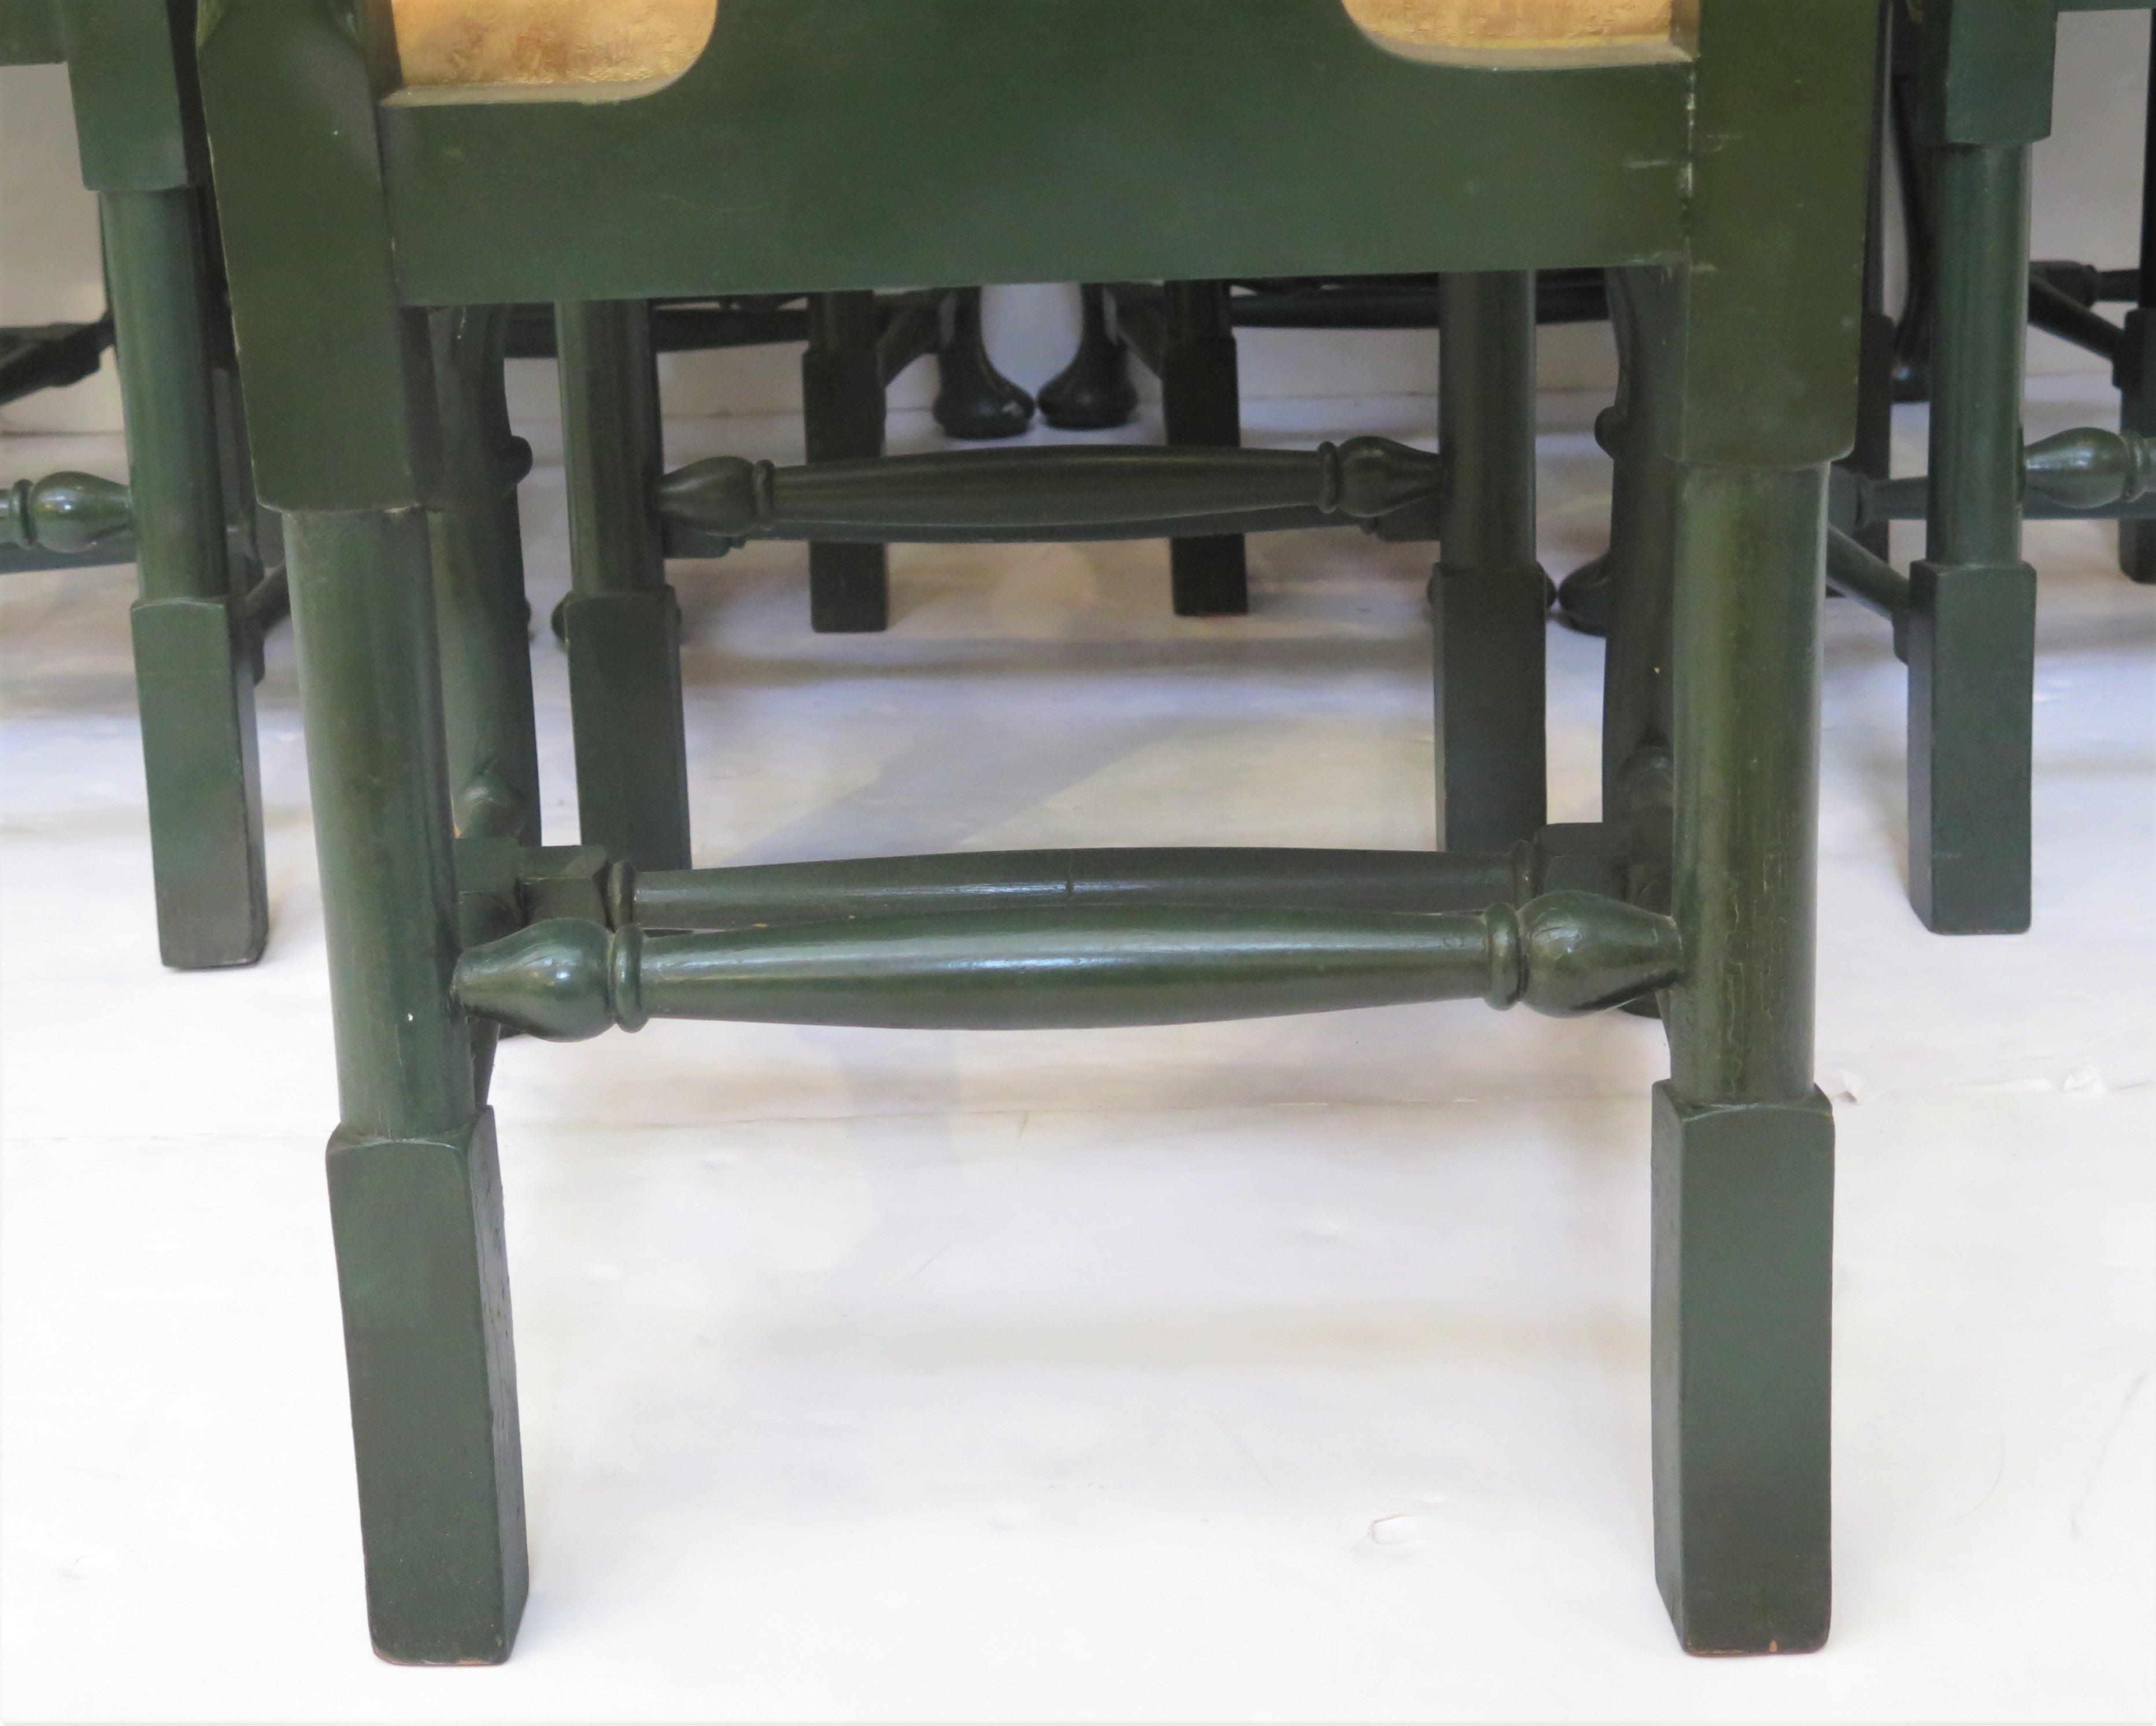 Group of Eight (8) Queen Anne-Style Side Chairs with Green Chinoiserie Decoration